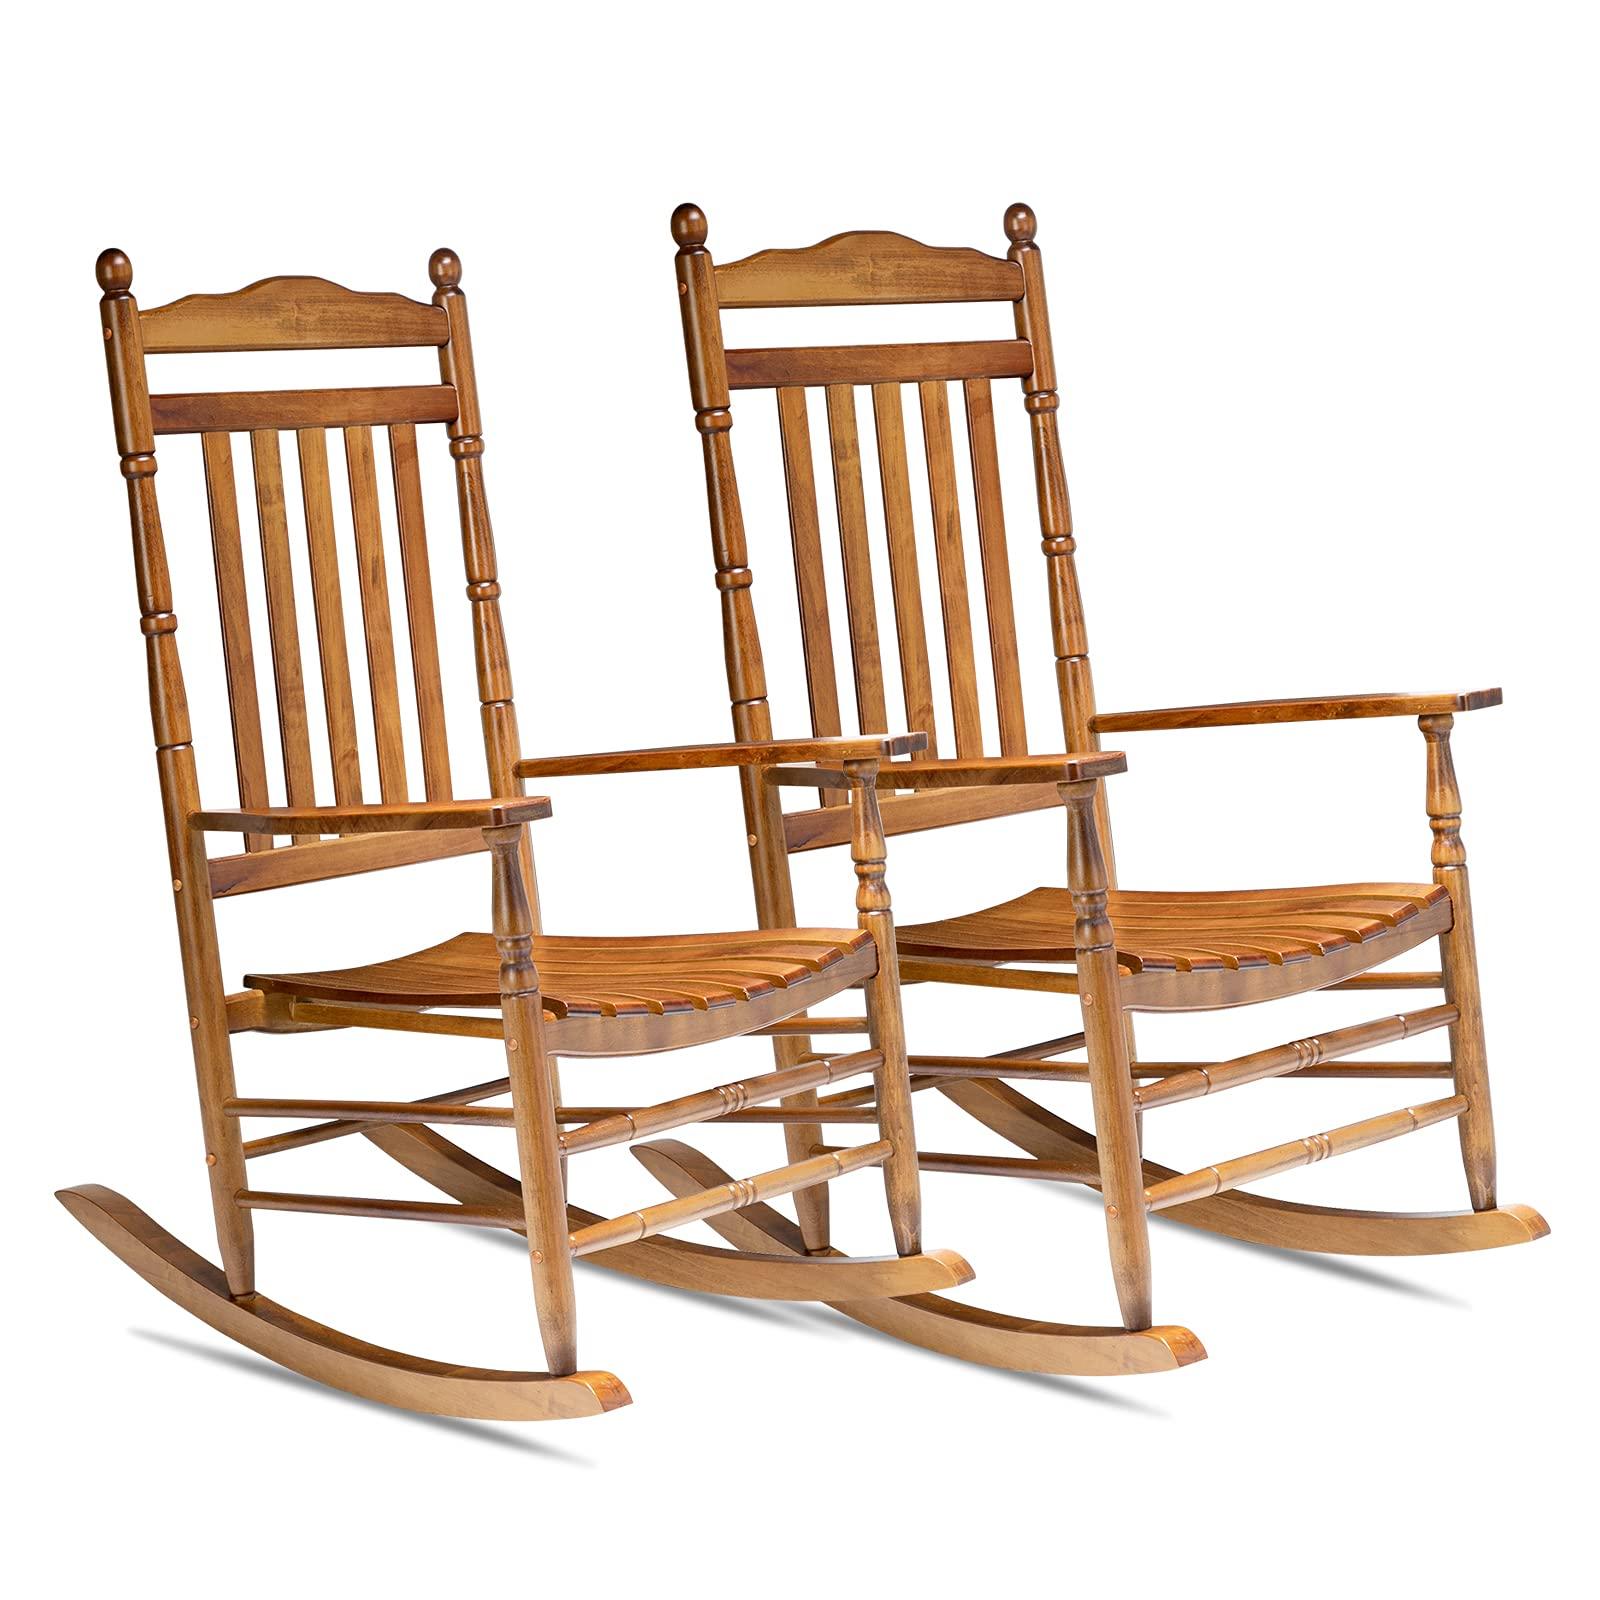 VINGLI 2PCS Wood Rocking Chairs Set of 2 Relaxing Rocker for Deck, Garden, Backyard, Porch, Indoor or Outdoor Use, Oak - CookCave